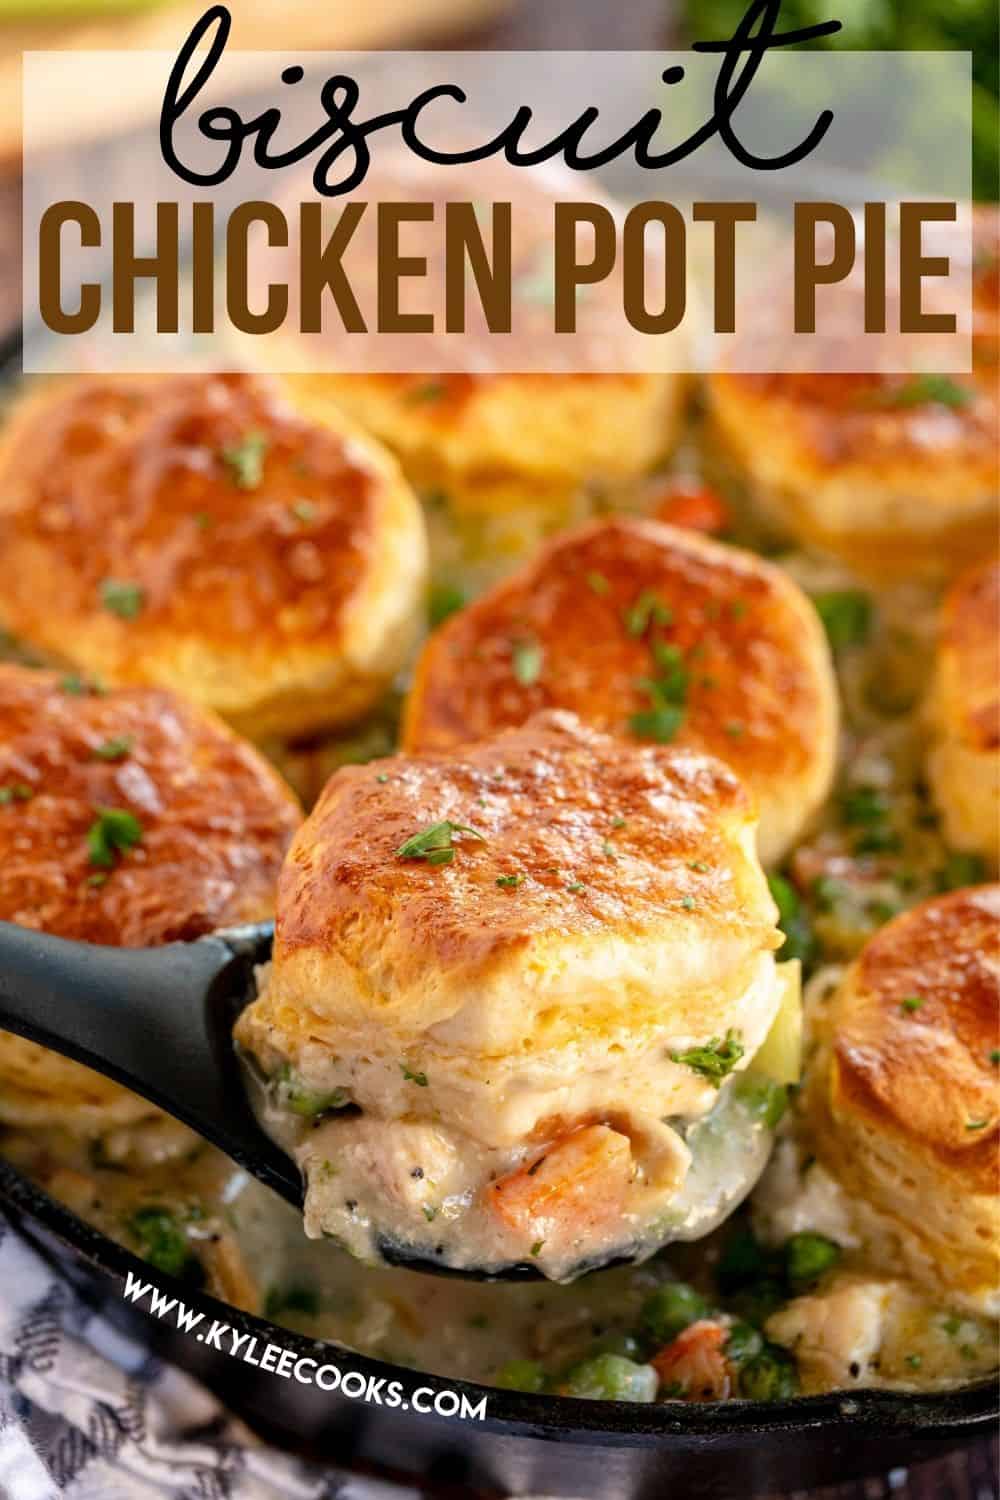 biscuit chicken pot pie with recipe name overlaid in text